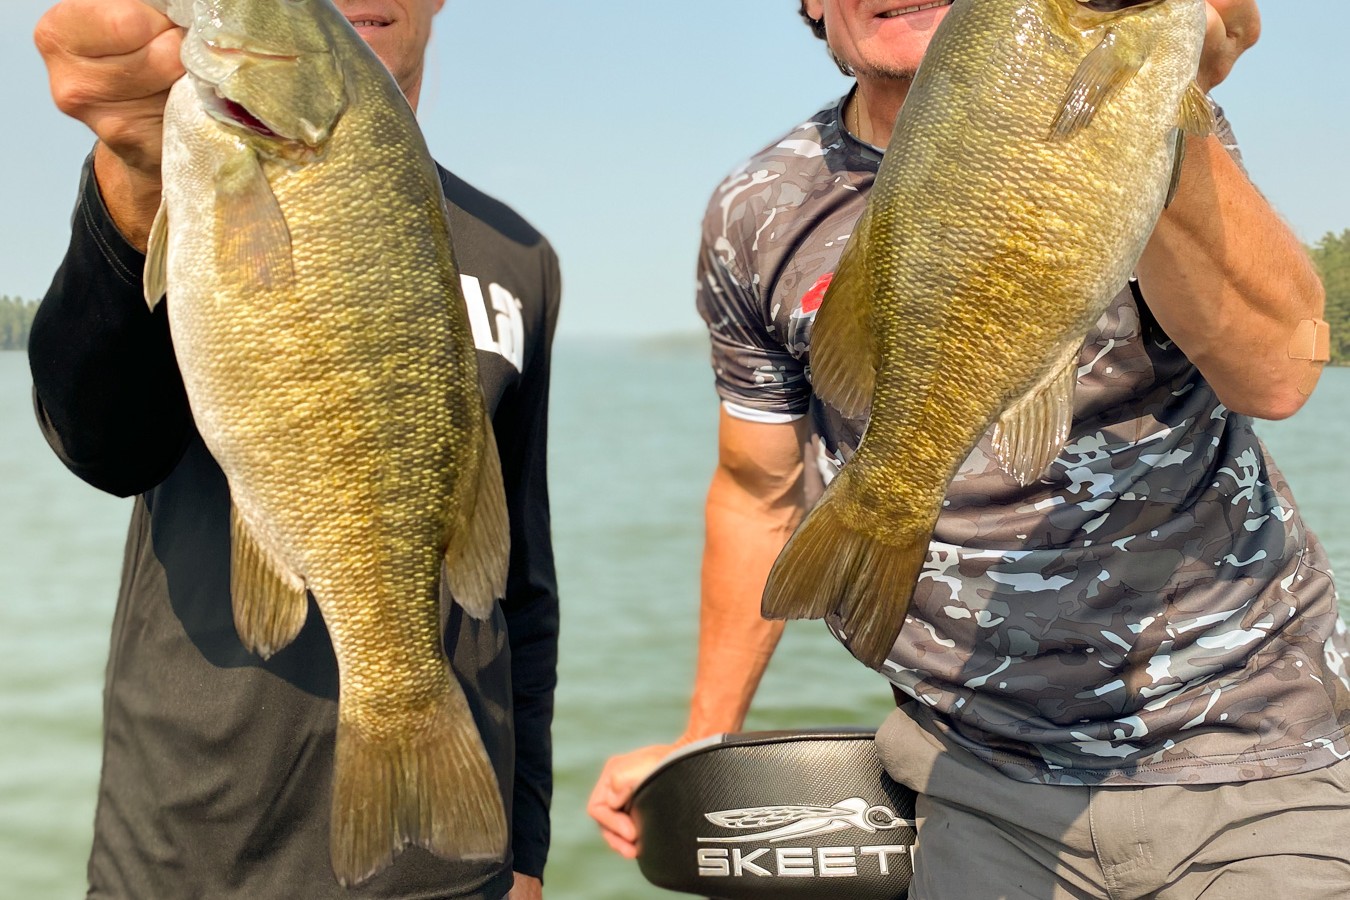 Fall Recession-proof Largemouth Bass - MidWest Outdoors